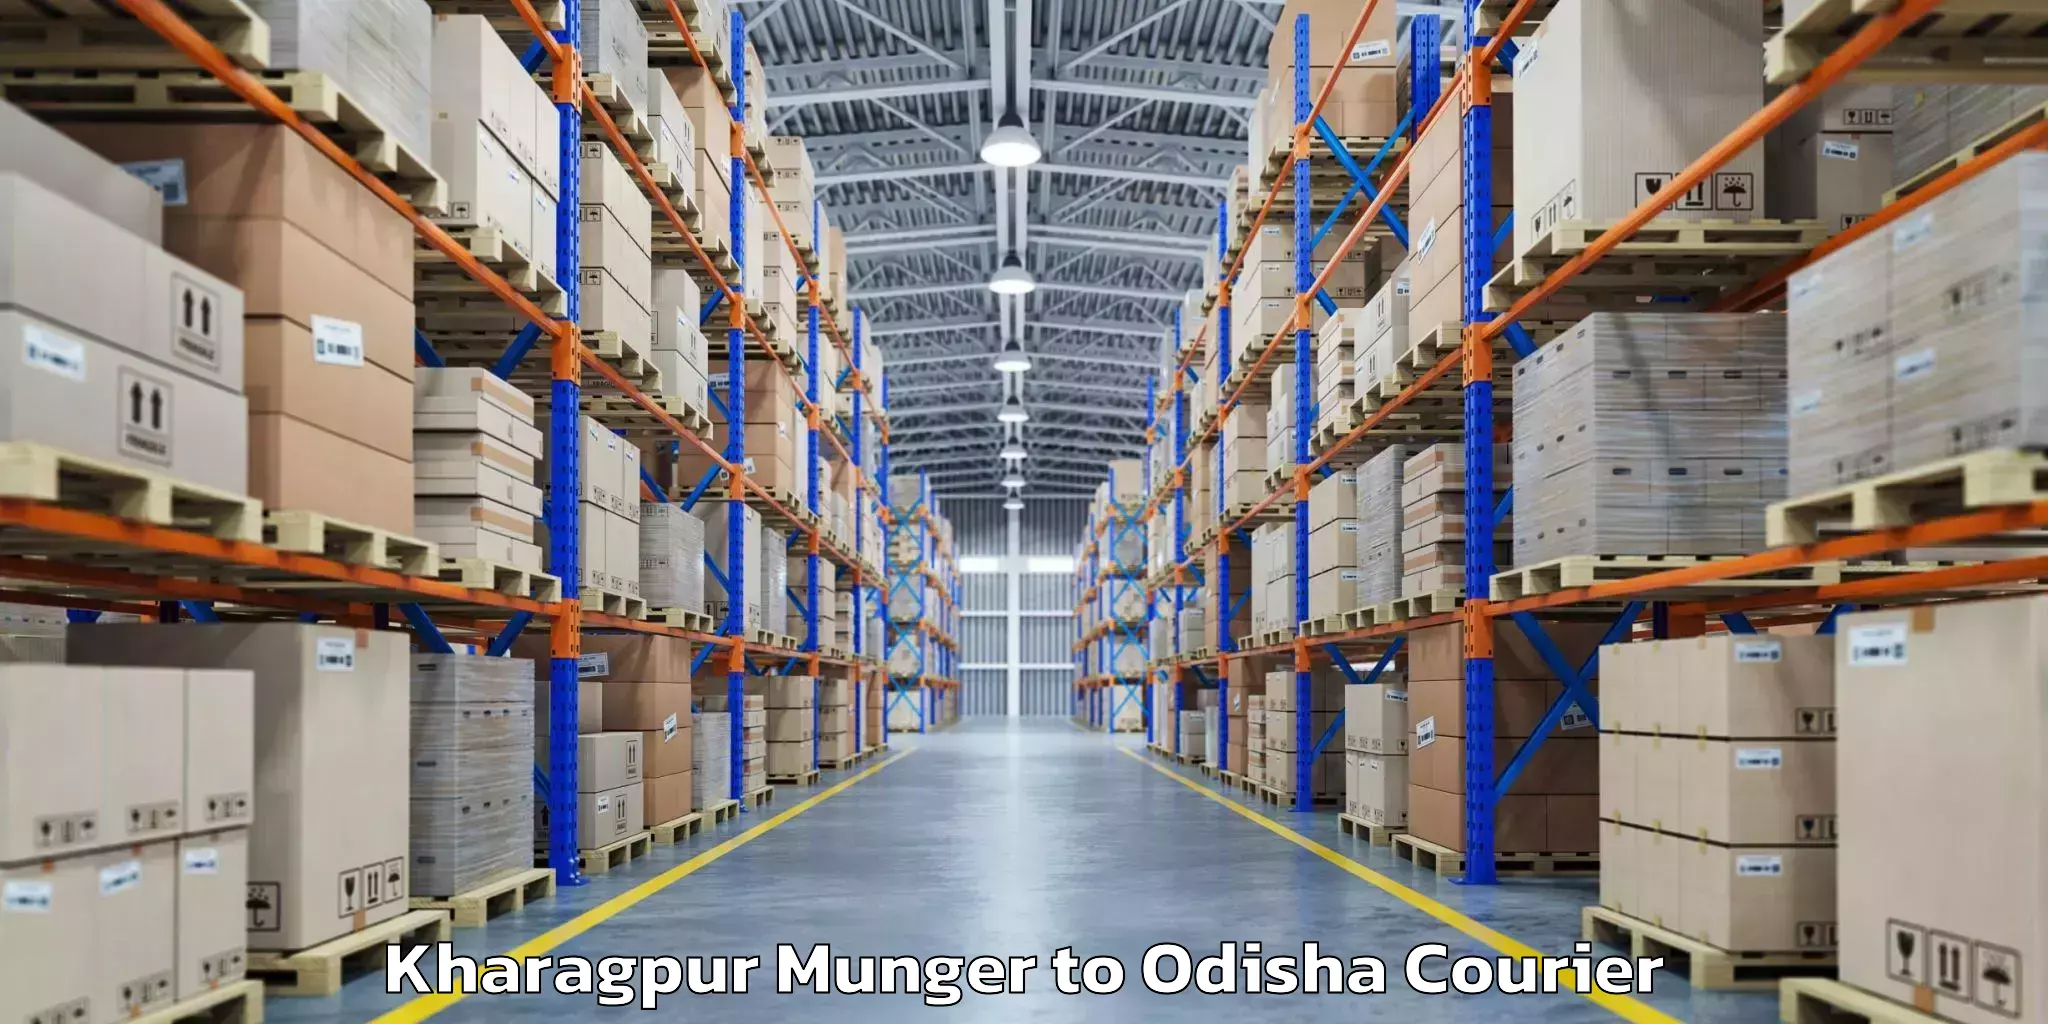 Luggage delivery optimization in Kharagpur Munger to Agarpada